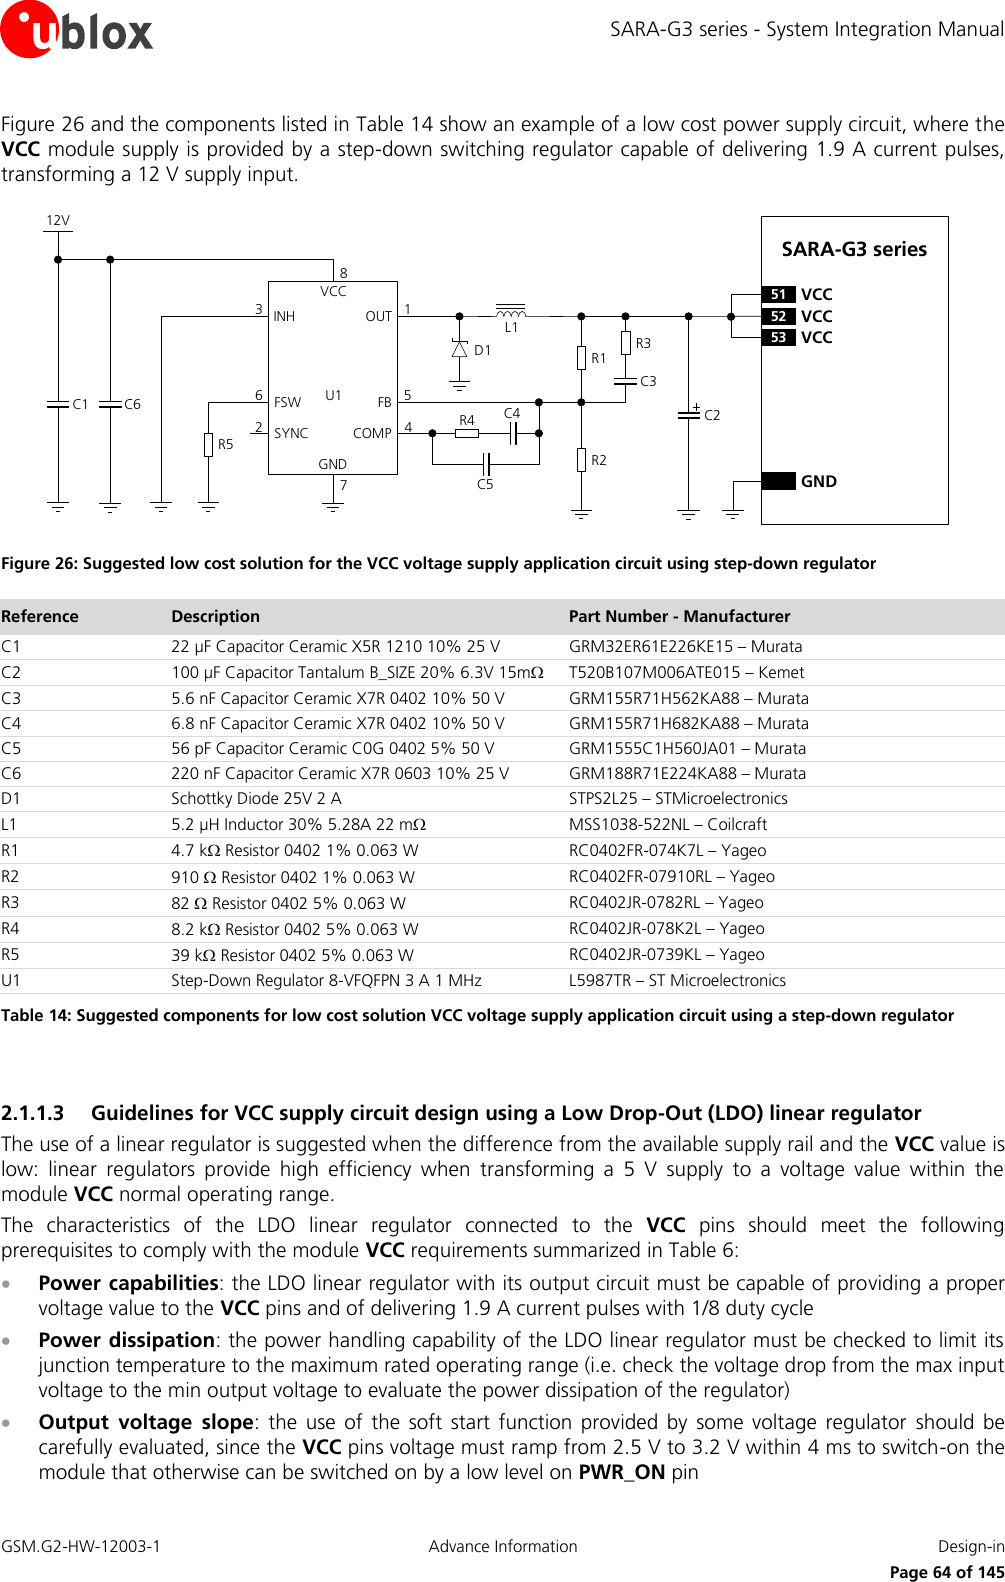 SARA-G3 series - System Integration Manual GSM.G2-HW-12003-1  Advance Information  Design-in     Page 64 of 145 Figure 26 and the components listed in Table 14 show an example of a low cost power supply circuit, where the VCC module supply is provided by a step-down switching regulator capable of delivering 1.9 A current pulses, transforming a 12 V supply input.  SARA-G3 series12VR5C6C1VCCINHFSWSYNCOUTGND263178C3C2D1 R1R2L1U1GNDFBCOMP54R3C4R4C552 VCC53 VCC51 VCC Figure 26: Suggested low cost solution for the VCC voltage supply application circuit using step-down regulator Reference Description Part Number - Manufacturer C1 22 µF Capacitor Ceramic X5R 1210 10% 25 V GRM32ER61E226KE15 – Murata C2 100 µF Capacitor Tantalum B_SIZE 20% 6.3V 15m T520B107M006ATE015 – Kemet C3 5.6 nF Capacitor Ceramic X7R 0402 10% 50 V GRM155R71H562KA88 – Murata C4  6.8 nF Capacitor Ceramic X7R 0402 10% 50 V GRM155R71H682KA88 – Murata C5 56 pF Capacitor Ceramic C0G 0402 5% 50 V GRM1555C1H560JA01 – Murata C6 220 nF Capacitor Ceramic X7R 0603 10% 25 V GRM188R71E224KA88 – Murata D1 Schottky Diode 25V 2 A STPS2L25 – STMicroelectronics L1 5.2 µH Inductor 30% 5.28A 22 m MSS1038-522NL – Coilcraft R1 4.7 k Resistor 0402 1% 0.063 W RC0402FR-074K7L – Yageo R2 910  Resistor 0402 1% 0.063 W RC0402FR-07910RL – Yageo R3 82  Resistor 0402 5% 0.063 W RC0402JR-0782RL – Yageo R4 8.2 k Resistor 0402 5% 0.063 W RC0402JR-078K2L – Yageo R5 39 k Resistor 0402 5% 0.063 W RC0402JR-0739KL – Yageo U1 Step-Down Regulator 8-VFQFPN 3 A 1 MHz L5987TR – ST Microelectronics Table 14: Suggested components for low cost solution VCC voltage supply application circuit using a step-down regulator  2.1.1.3 Guidelines for VCC supply circuit design using a Low Drop-Out (LDO) linear regulator The use of a linear regulator is suggested when the difference from the available supply rail and the VCC value is low:  linear  regulators  provide  high  efficiency  when  transforming  a  5  V  supply  to  a  voltage  value  within  the module VCC normal operating range. The  characteristics  of  the  LDO  linear  regulator  connected  to  the  VCC  pins  should  meet  the  following prerequisites to comply with the module VCC requirements summarized in Table 6:  Power capabilities: the LDO linear regulator with its output circuit must be capable of providing a proper voltage value to the VCC pins and of delivering 1.9 A current pulses with 1/8 duty cycle  Power dissipation: the power handling capability of the LDO linear regulator must be checked to limit its junction temperature to the maximum rated operating range (i.e. check the voltage drop from the max input voltage to the min output voltage to evaluate the power dissipation of the regulator)  Output  voltage  slope:  the  use  of  the  soft  start  function  provided  by  some  voltage  regulator  should  be carefully evaluated, since the VCC pins voltage must ramp from 2.5 V to 3.2 V within 4 ms to switch-on the module that otherwise can be switched on by a low level on PWR_ON pin 